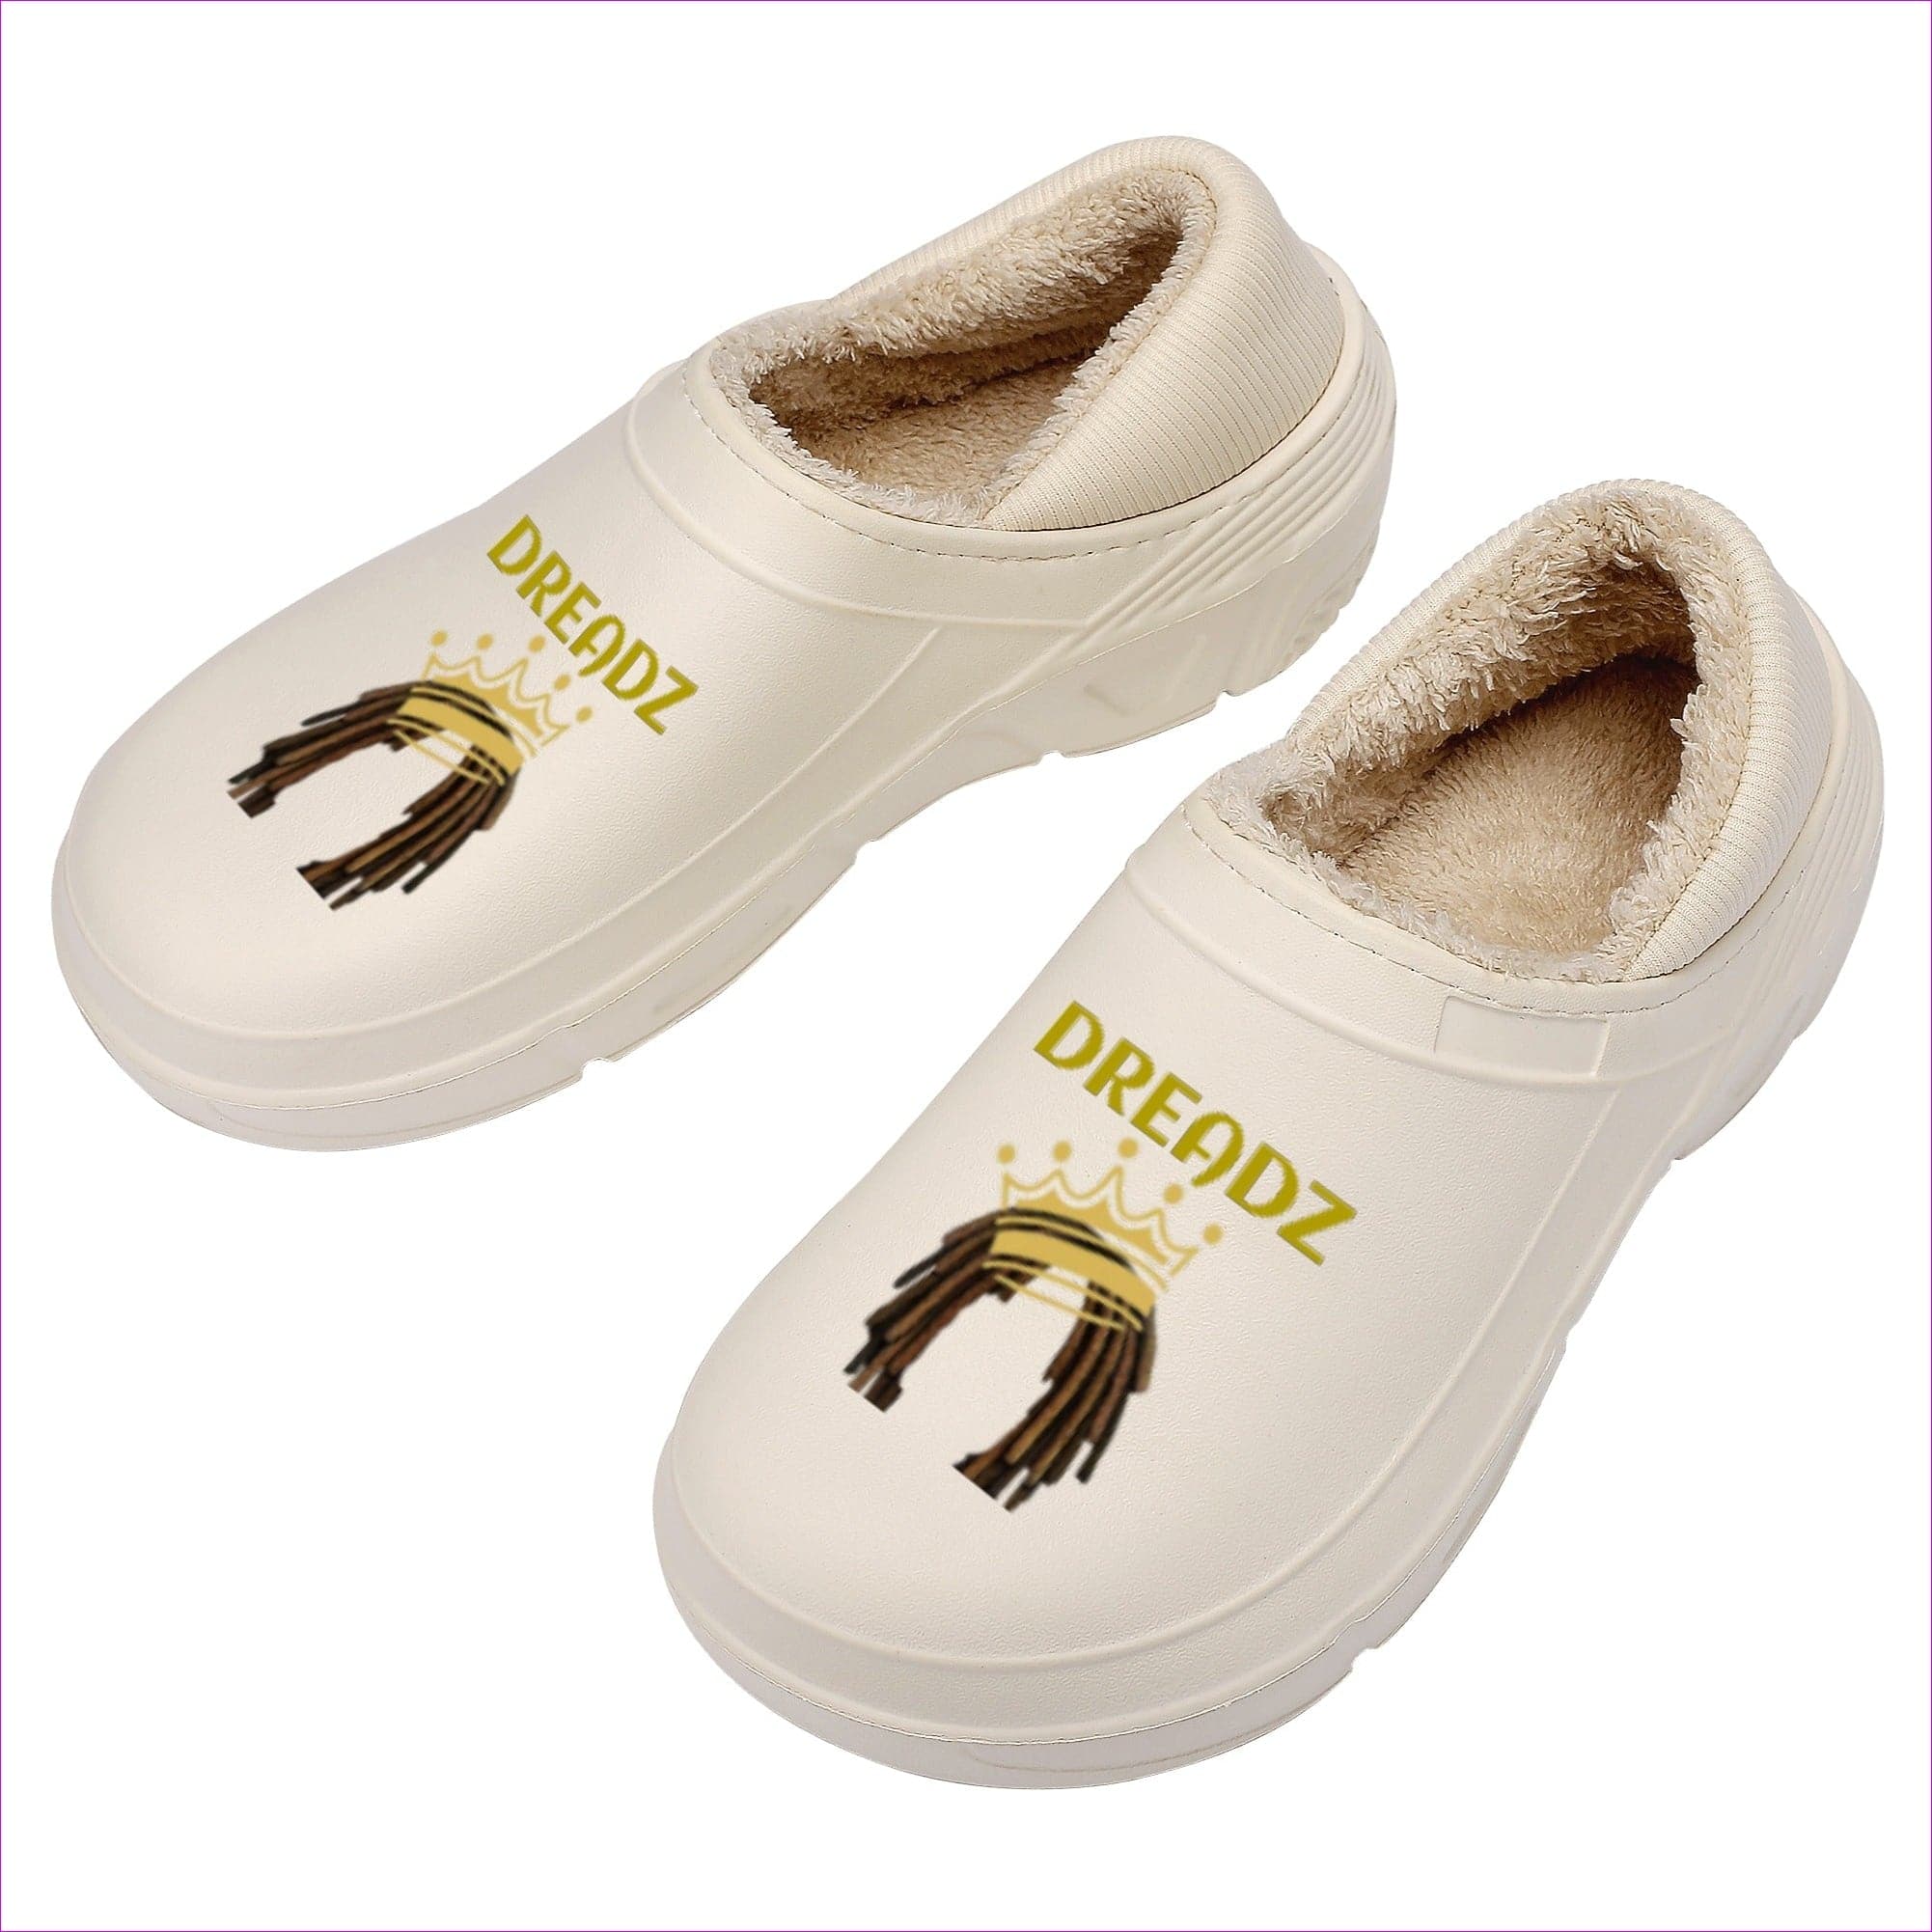 Crowned Dreadz Men's Warm Cotton Slippers - men's slippers at TFC&H Co.